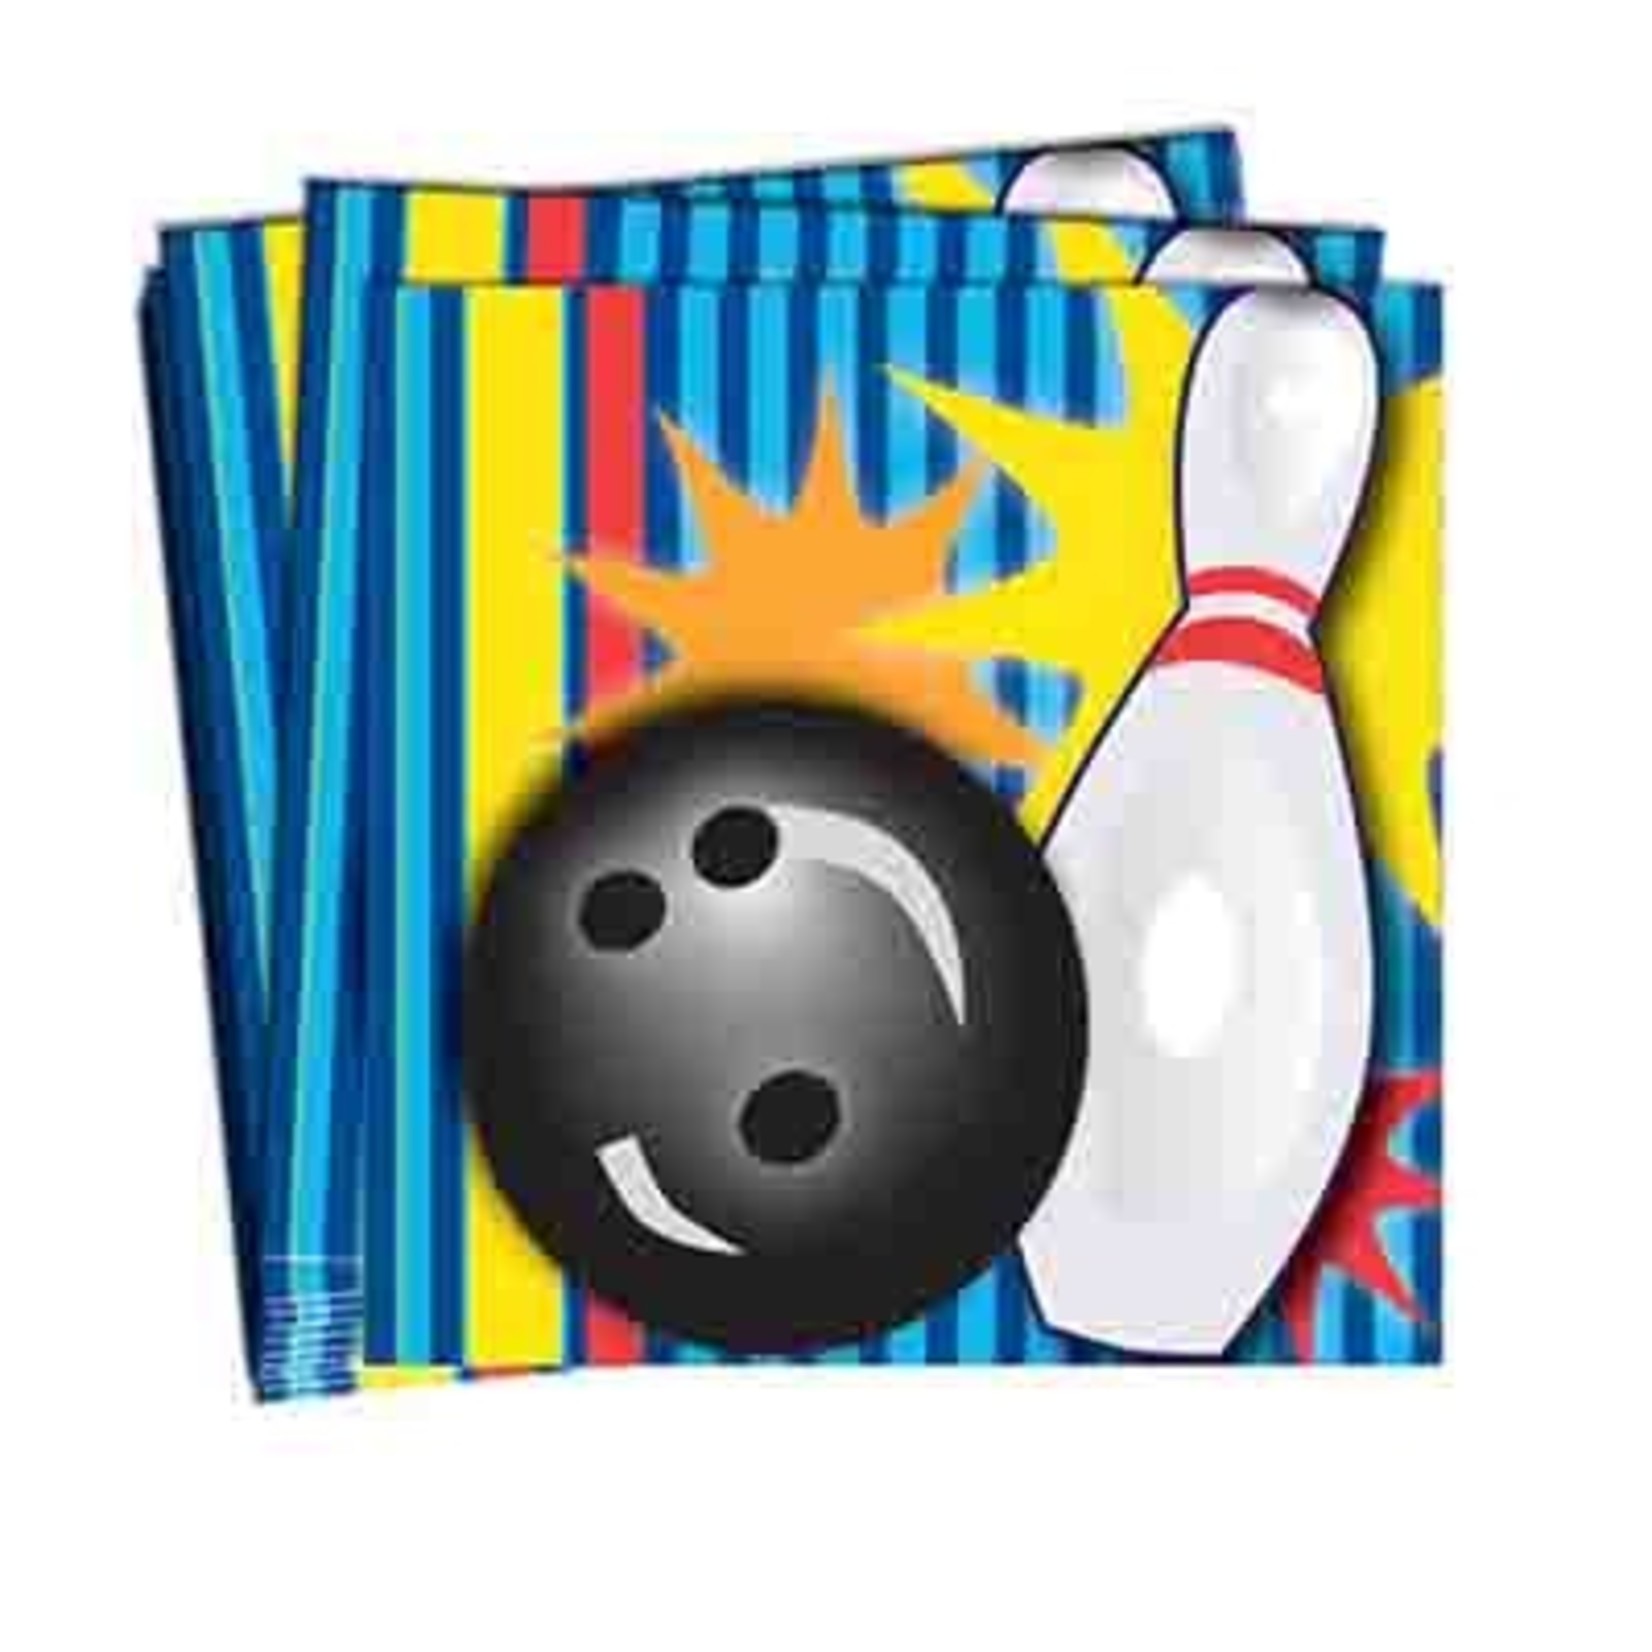 SKD Party by Forum Bowling Beverage Napkins - 16ct.